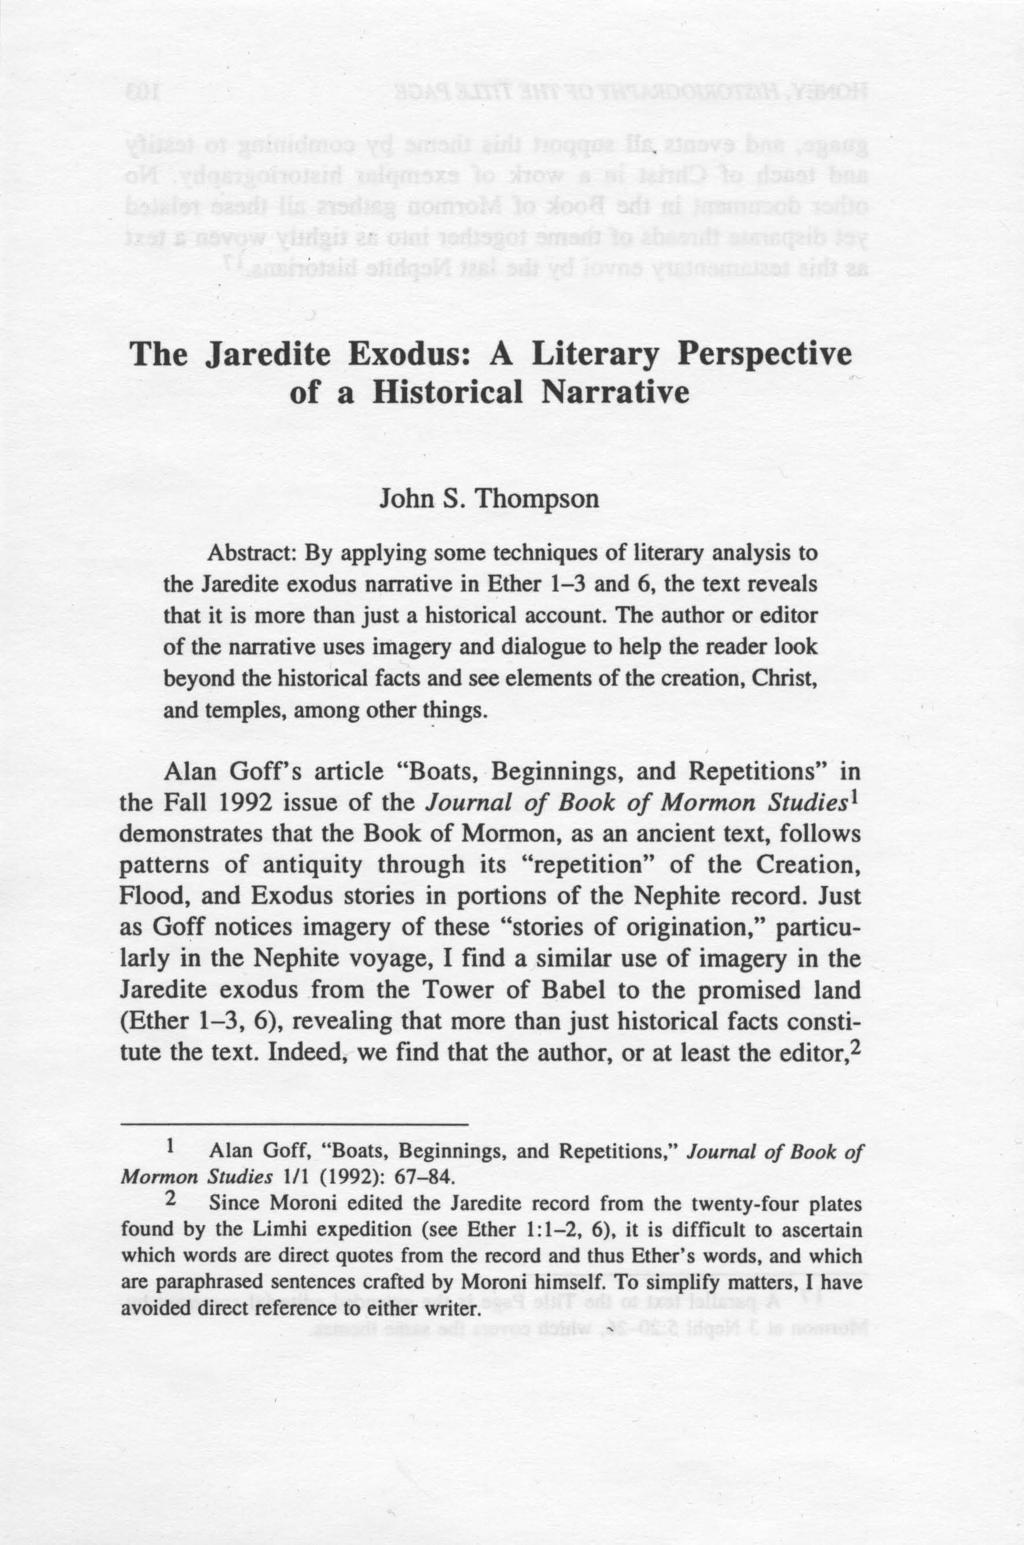 The Jaredite Exodus: A Literary Perspective of a Historical Narrative John S.